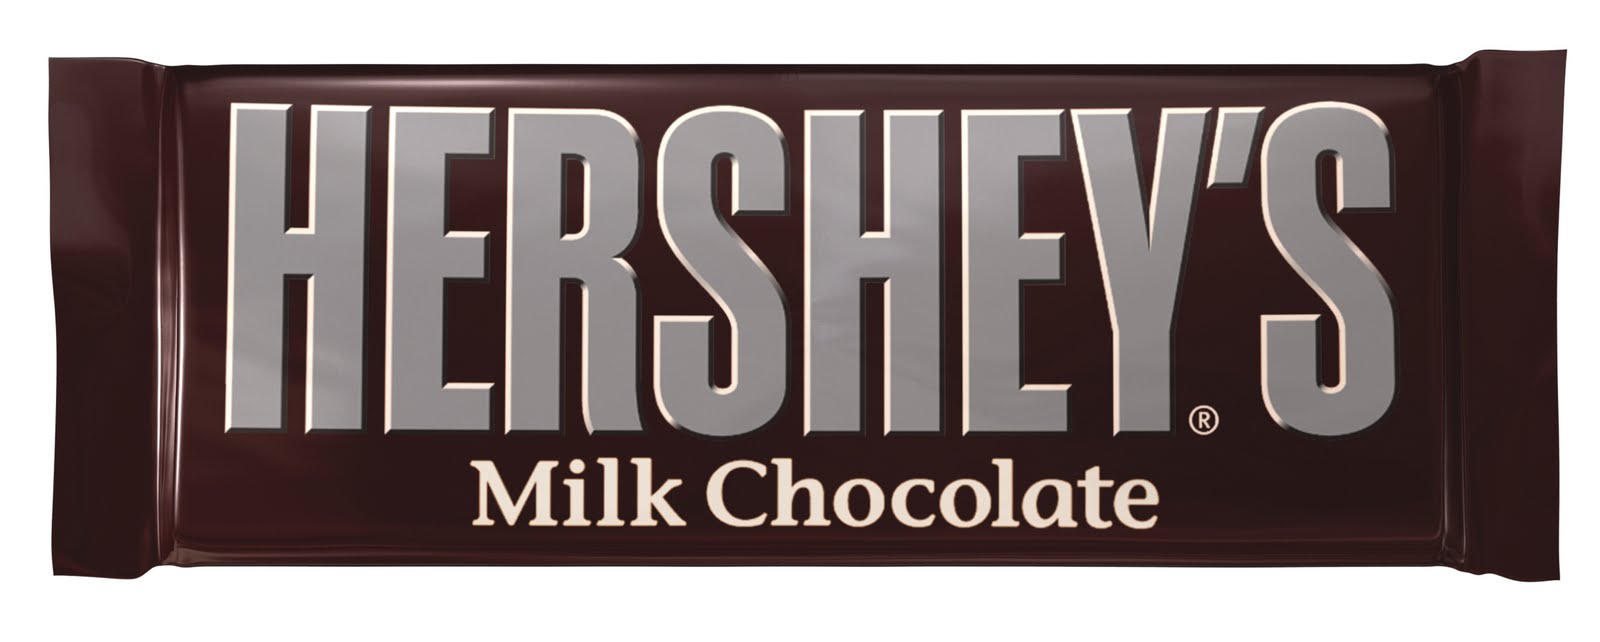 Say S'mores, and smile this Summer with Hershey's Milk Chocolate ...